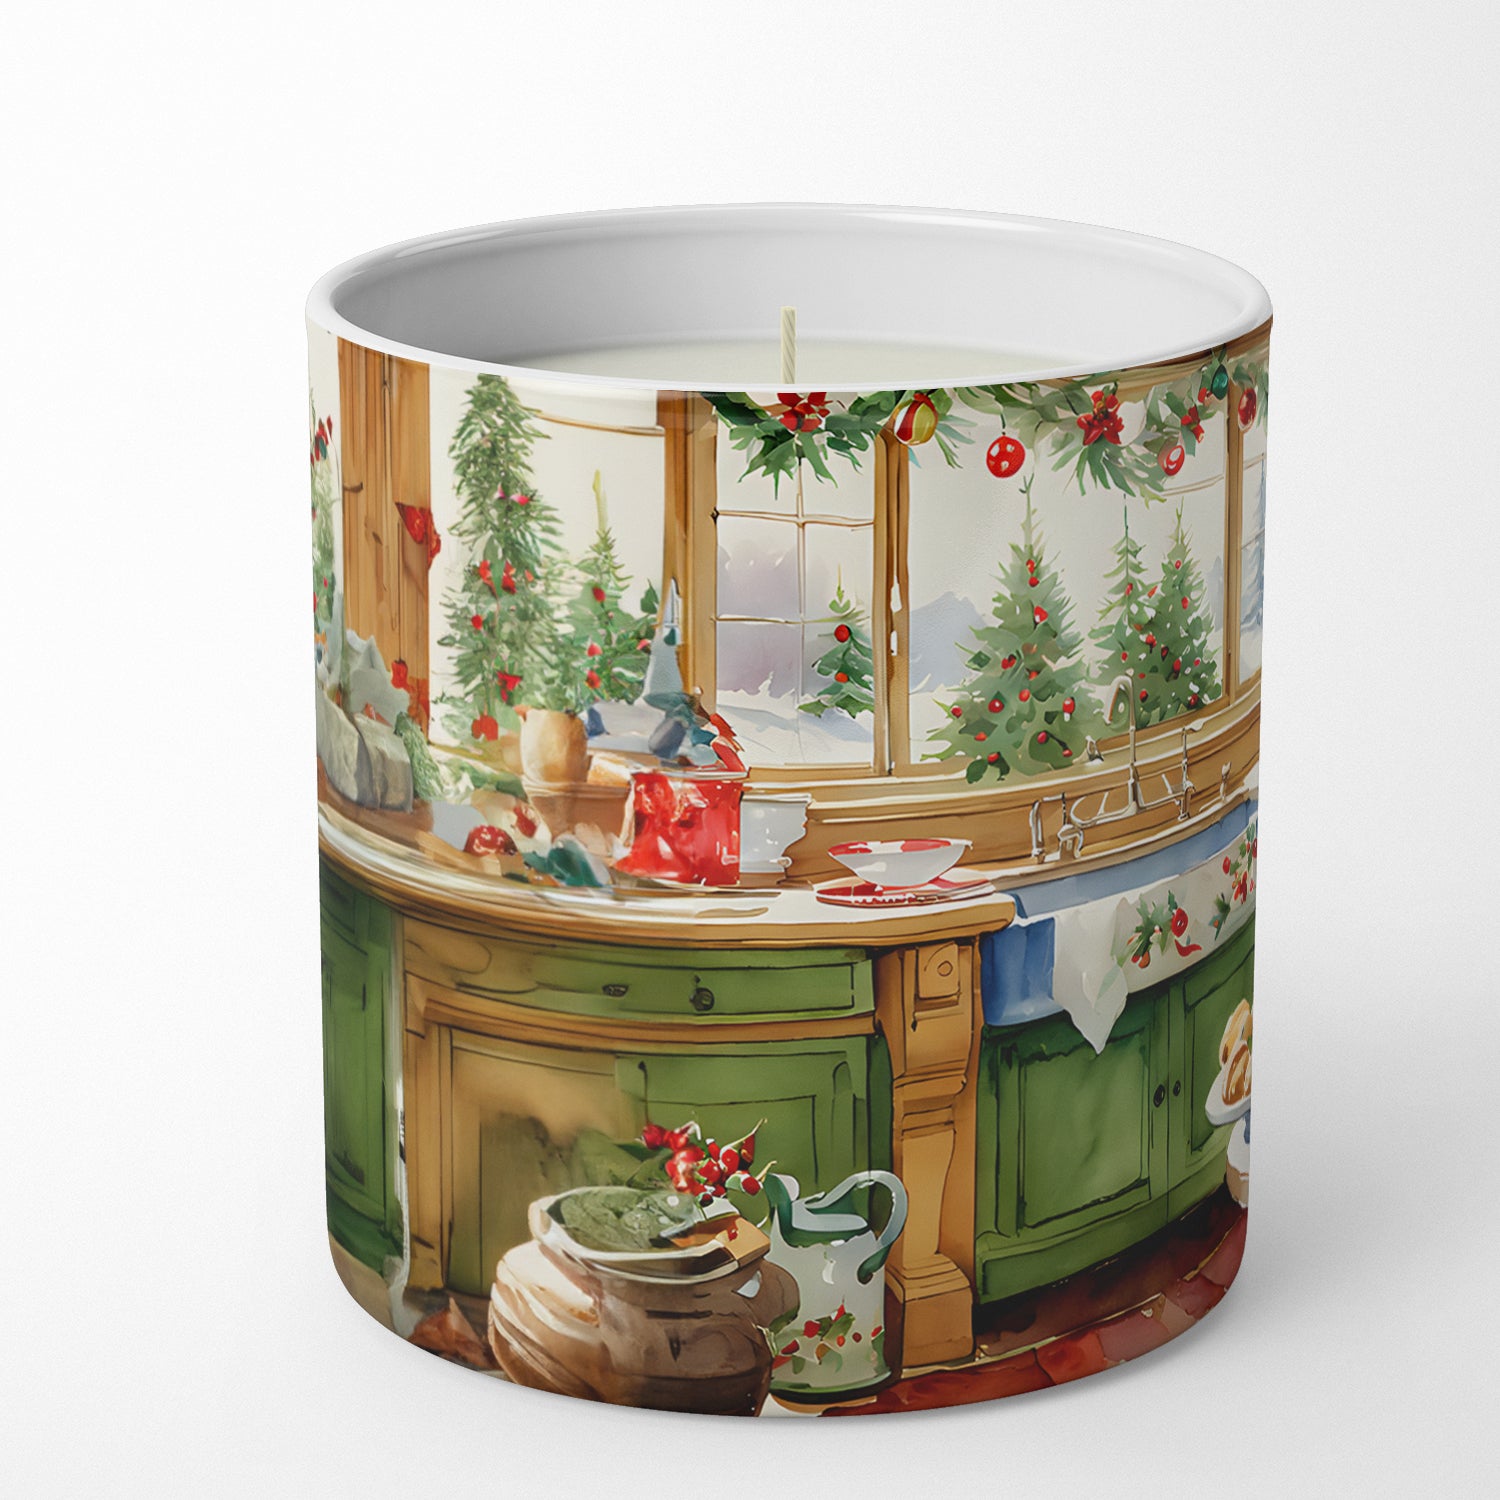 Chow Chow Christmas Cookies Decorative Soy Candle